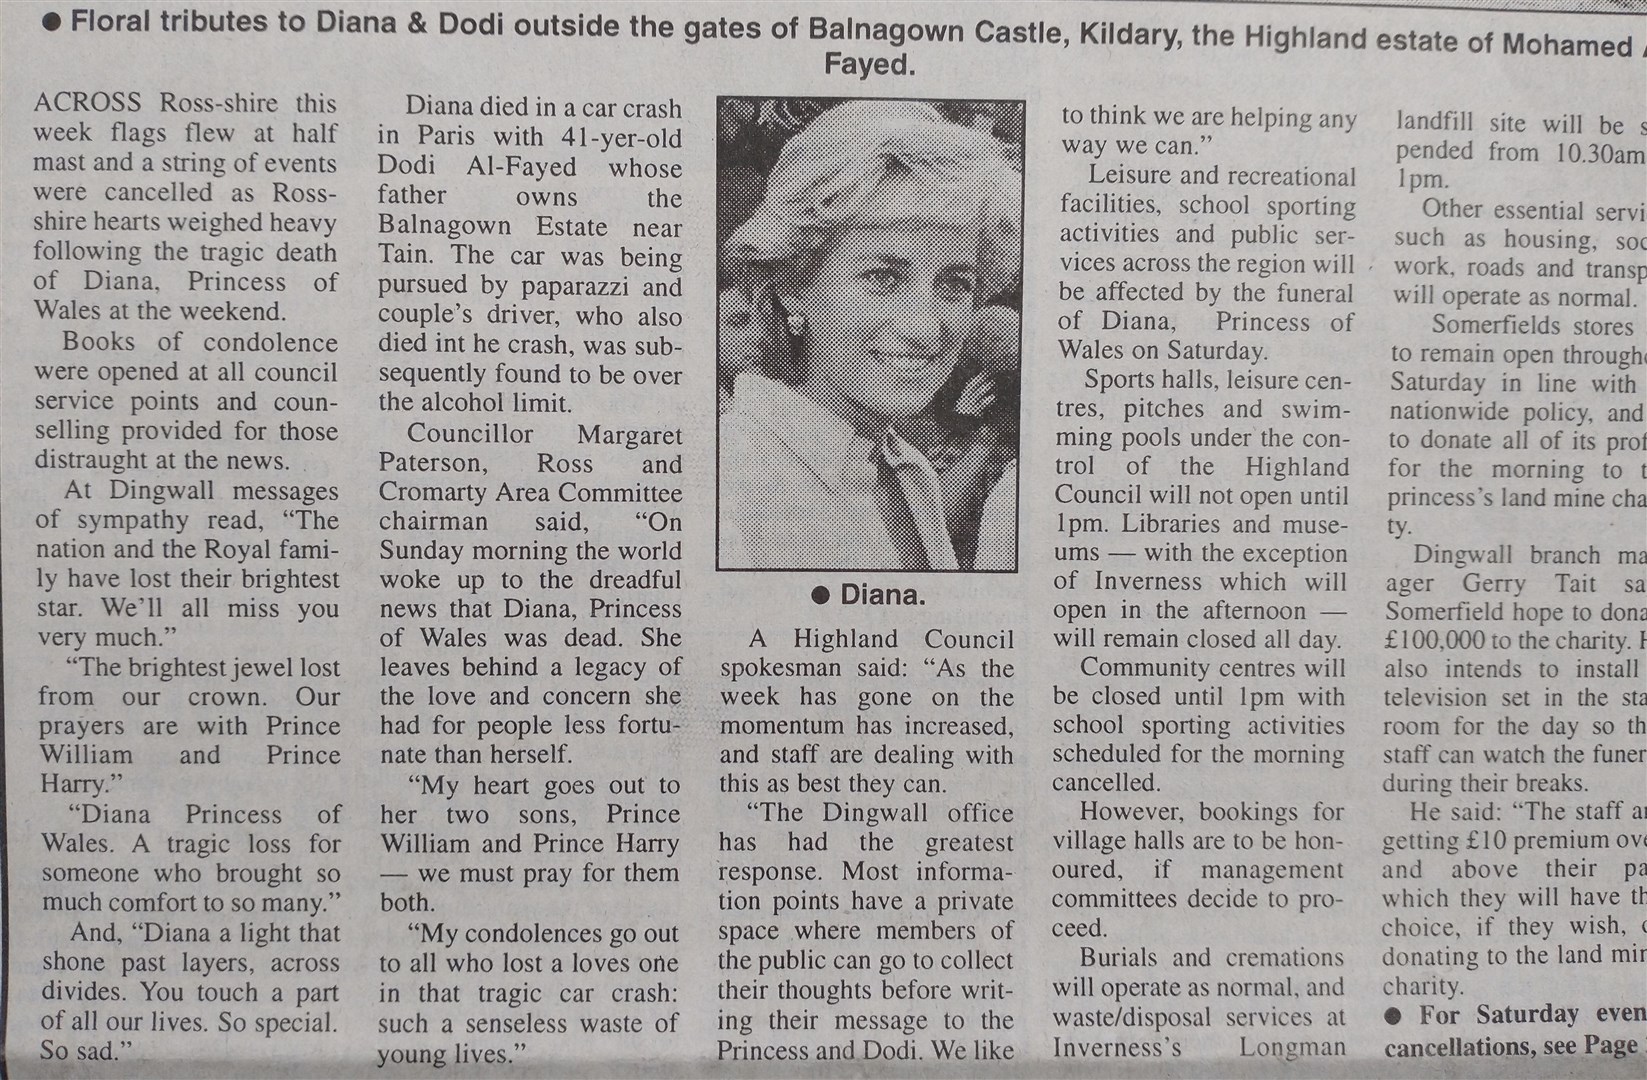 The death of Princess Diana made the front page of the Ross-shire Journal which reported a major impact across the county.